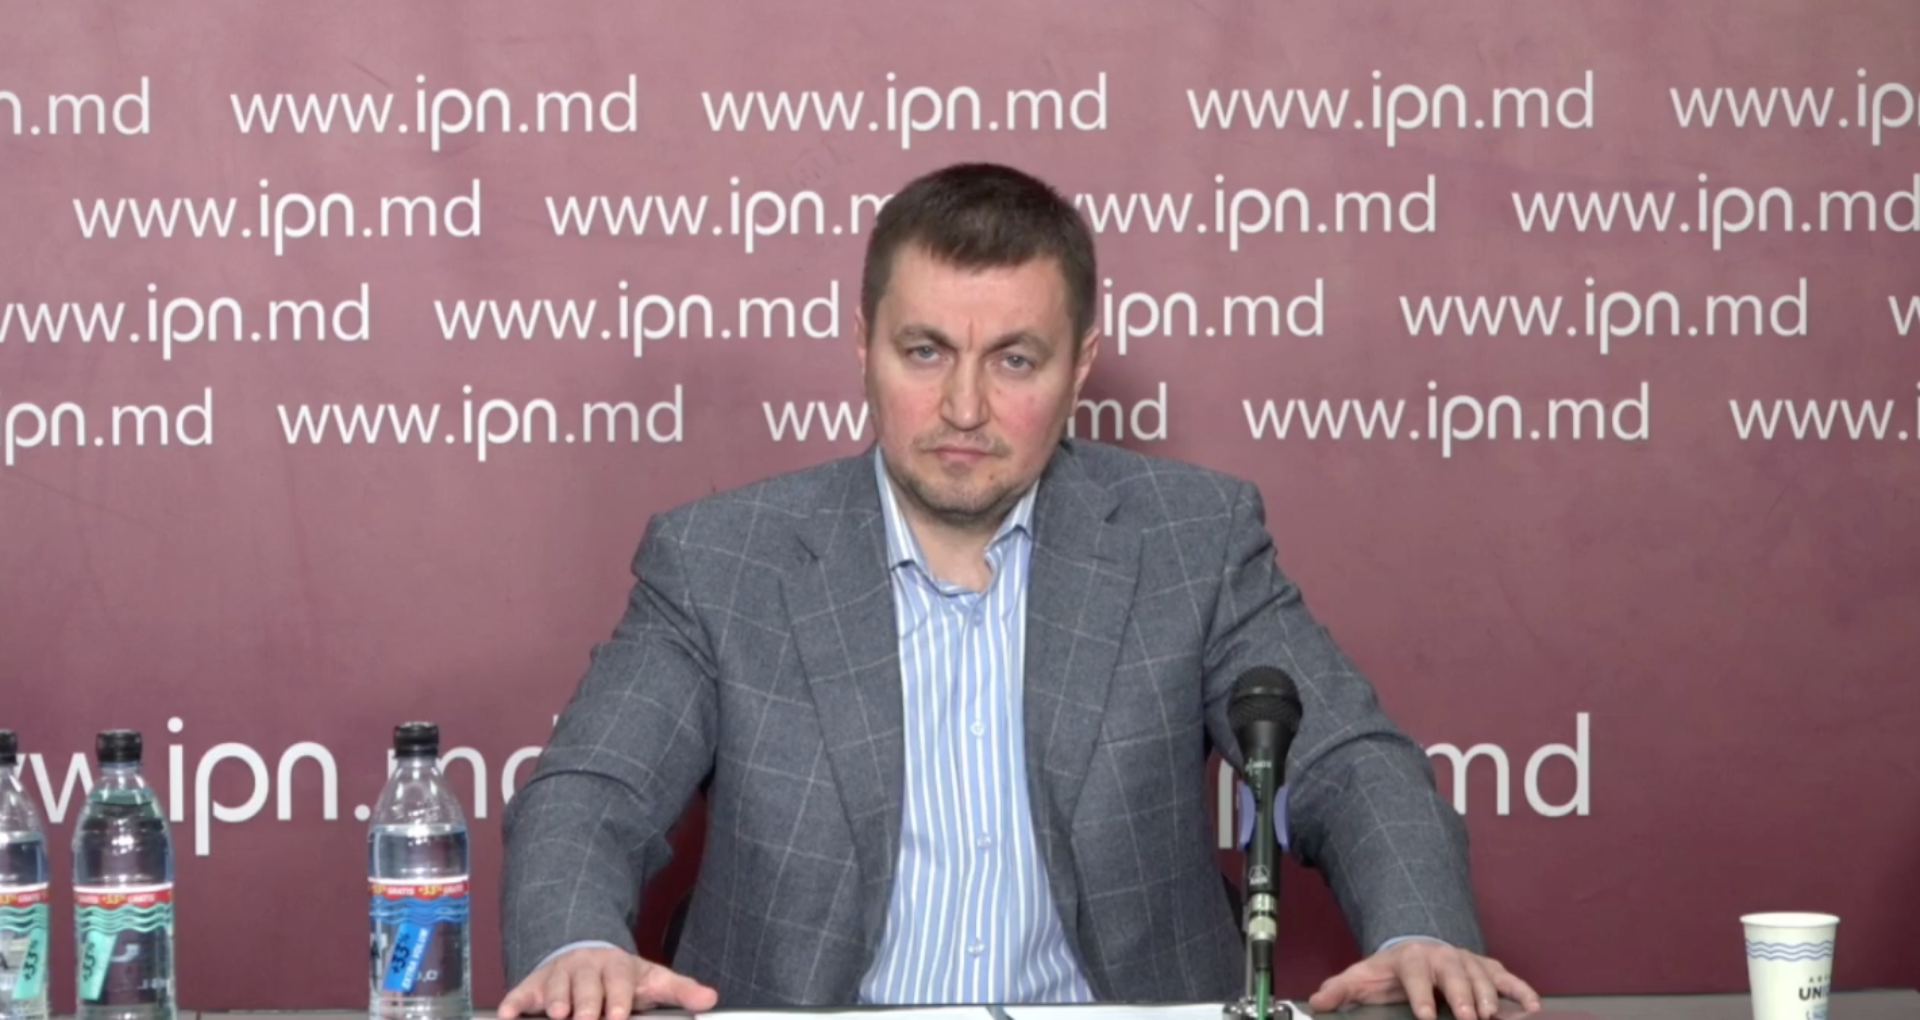 Ion Munteanu, appointed interim Prosecutor General. The Head of State signed the decree